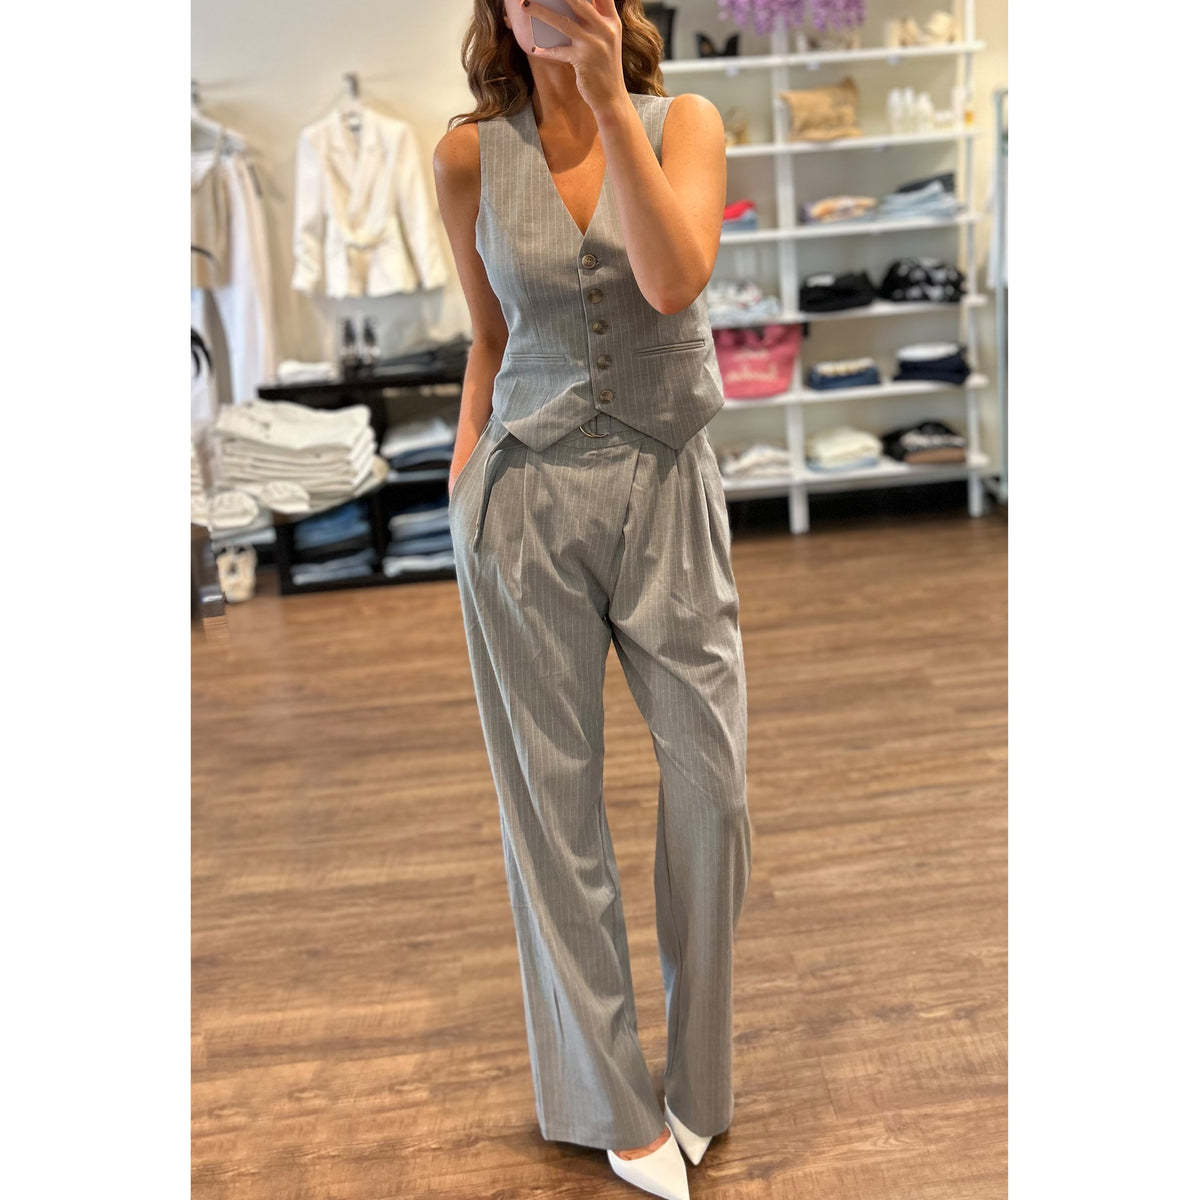 Heartloom Anais Pinstriped Vest in Heather Grey